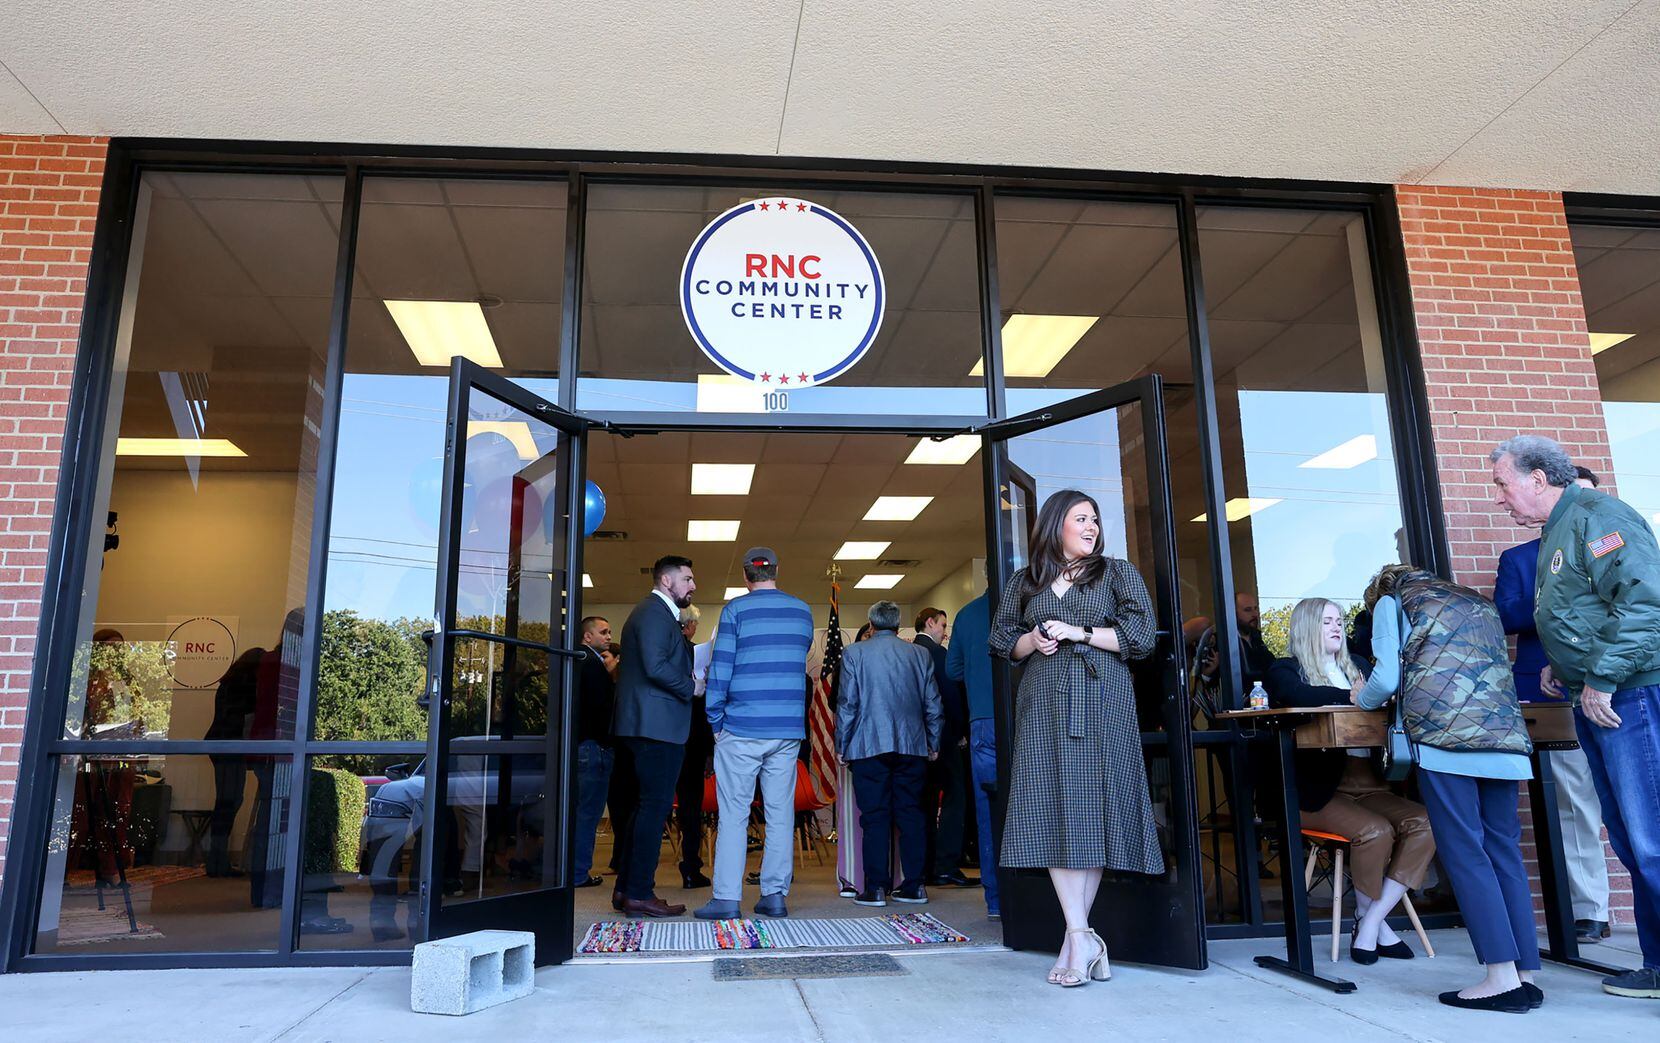 The Republican National Committee opens a community center in the Dallas area.   (Steve Nurenberg/Special Contributor)